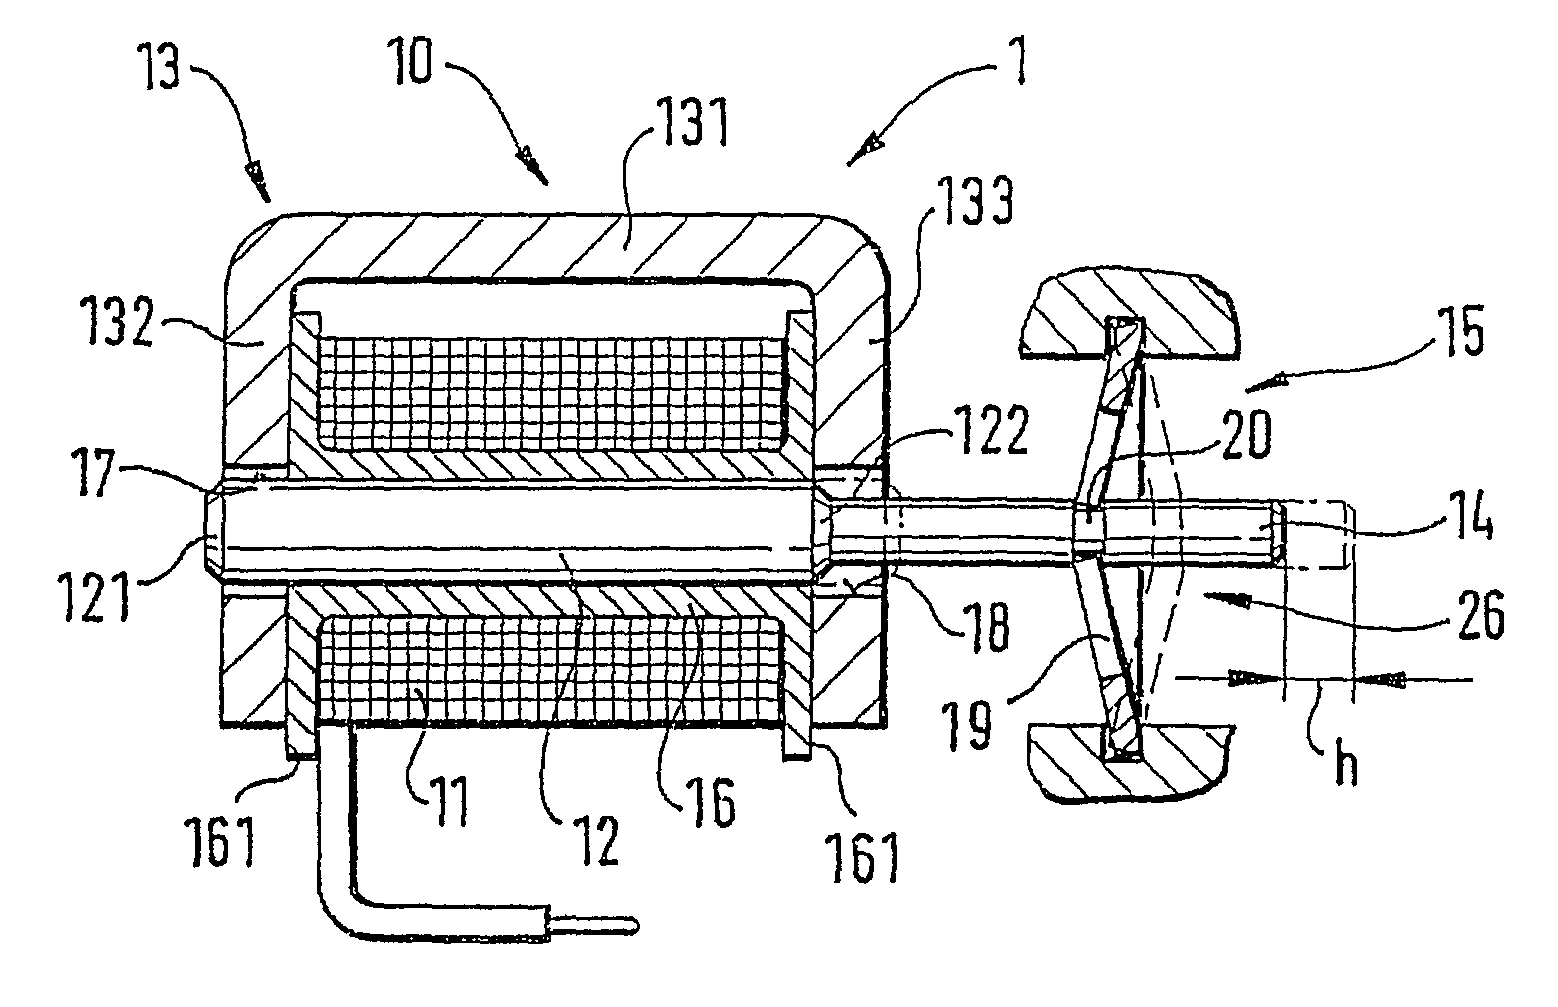 Actuator, in particular for valves, relays or similar